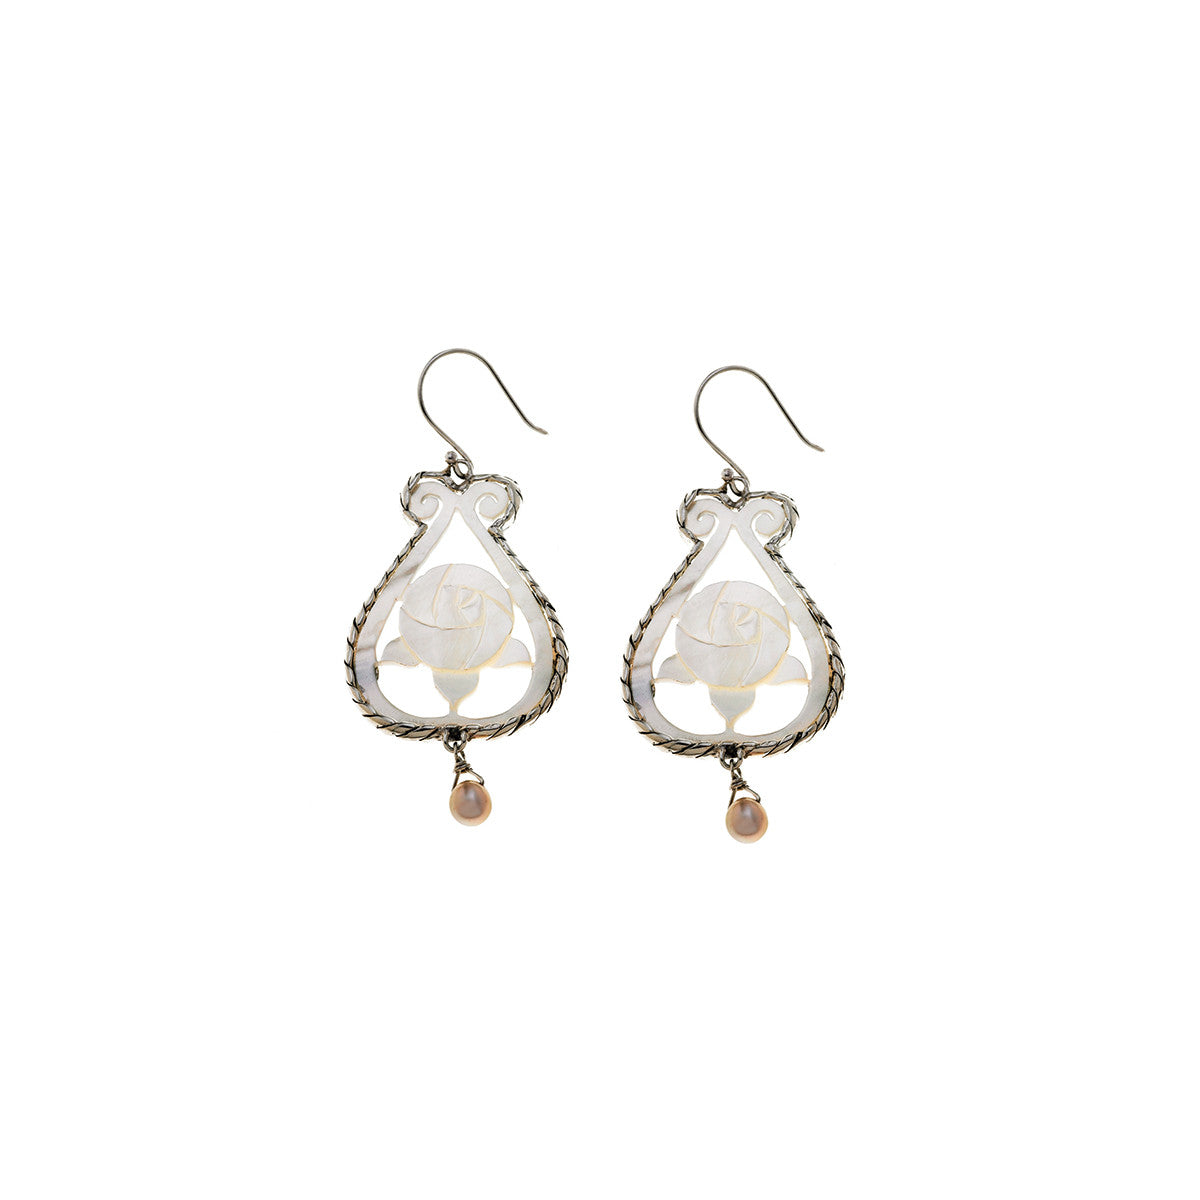 Orient Fleur Rose Sterling Silver Pearl Drop Earring - Cynthia Gale New York Jewelry